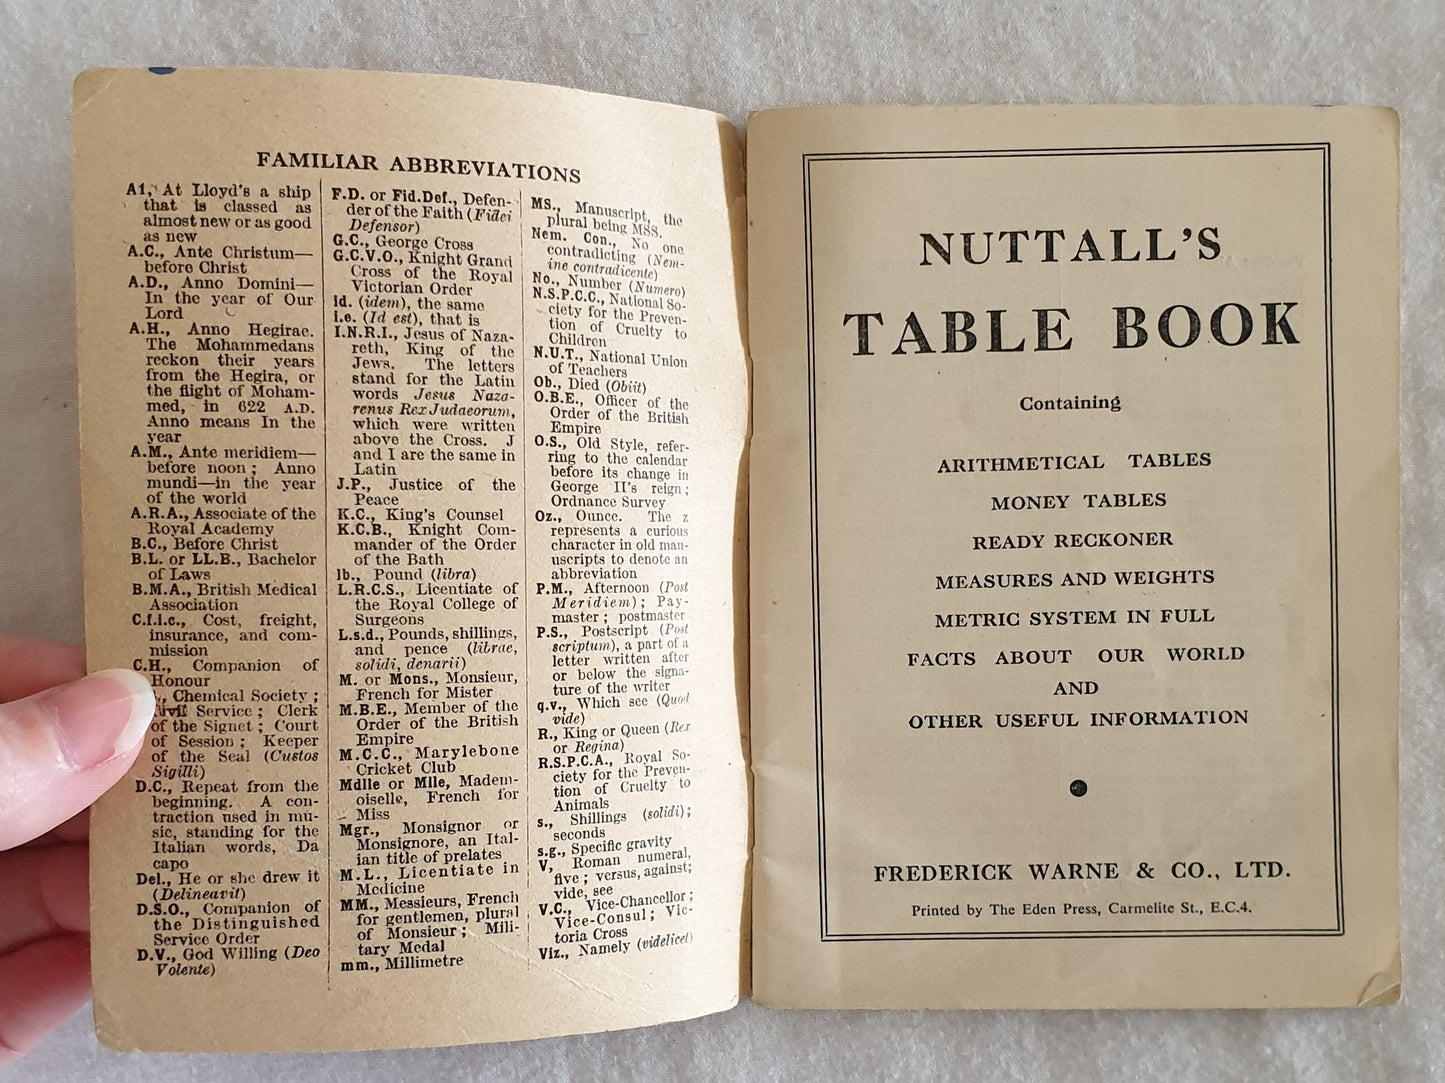 Nuttall's Table Book of Essential Facts & Figures